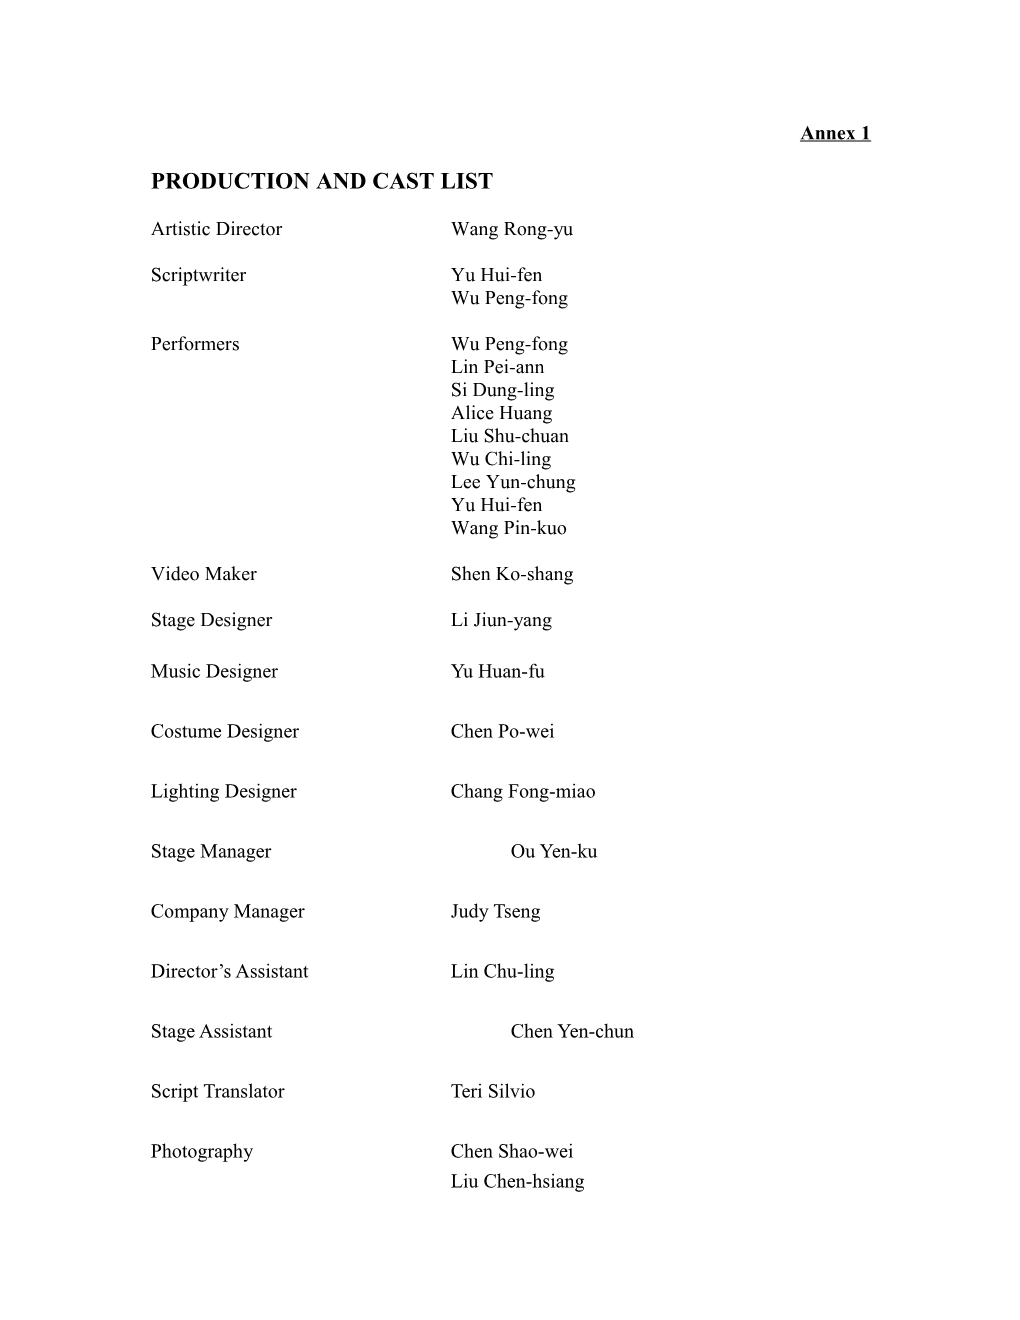 Production and Cast List